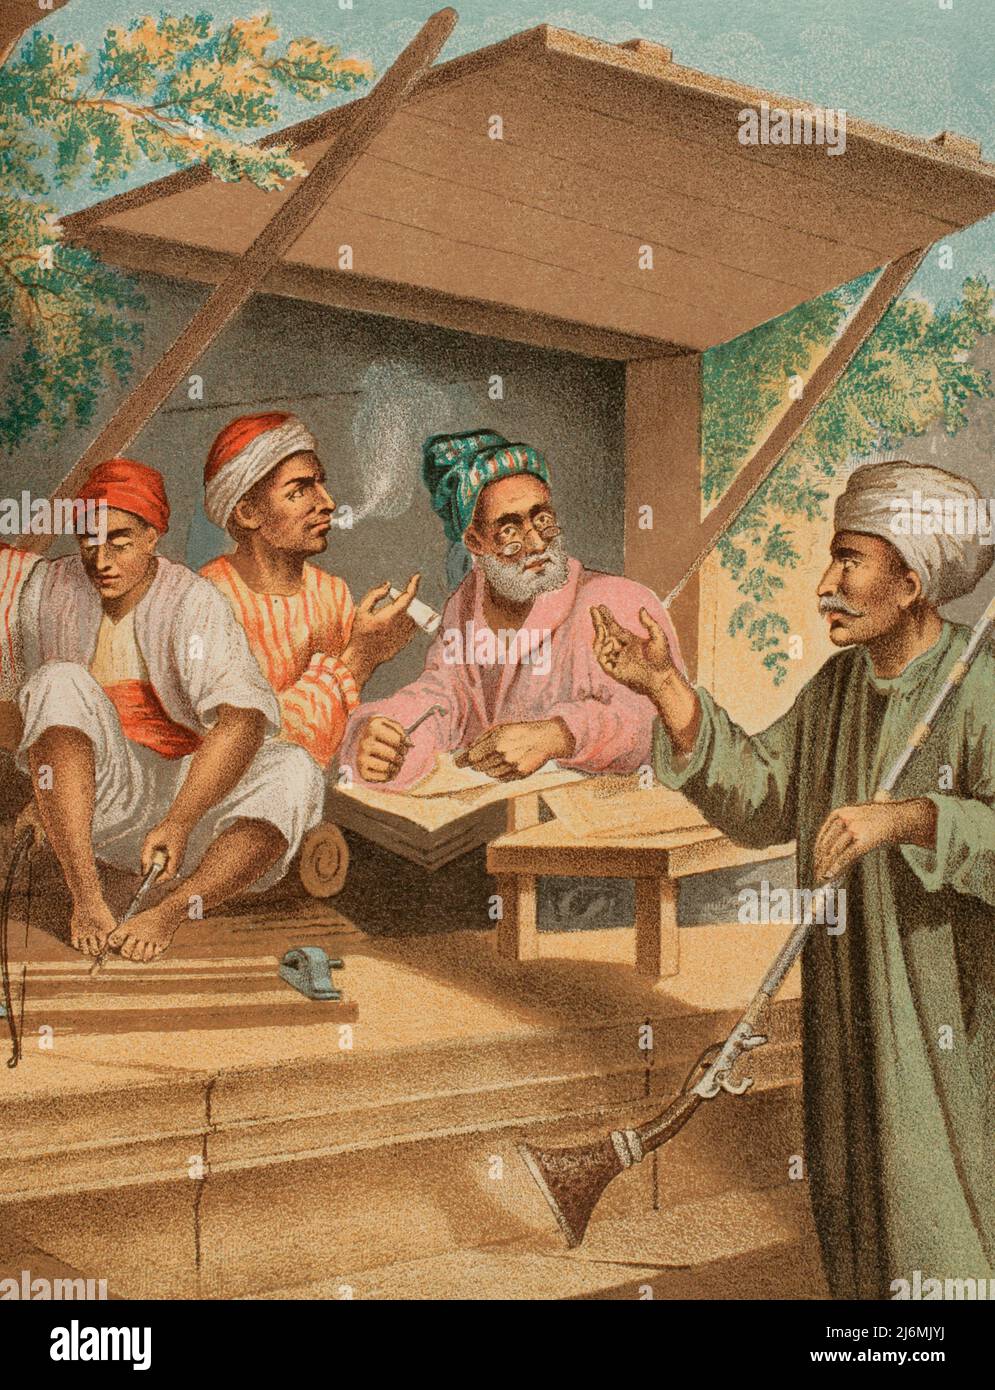 Turkish craftsmen in Constantinople. From left to right: wood turner, babouche embroiderer and gunsmith. Chromolithography. Illustration by José Acevedo. Lithograph by José Maria Mateu. Detail. "Viaje a Oriente", 1878. Stock Photo